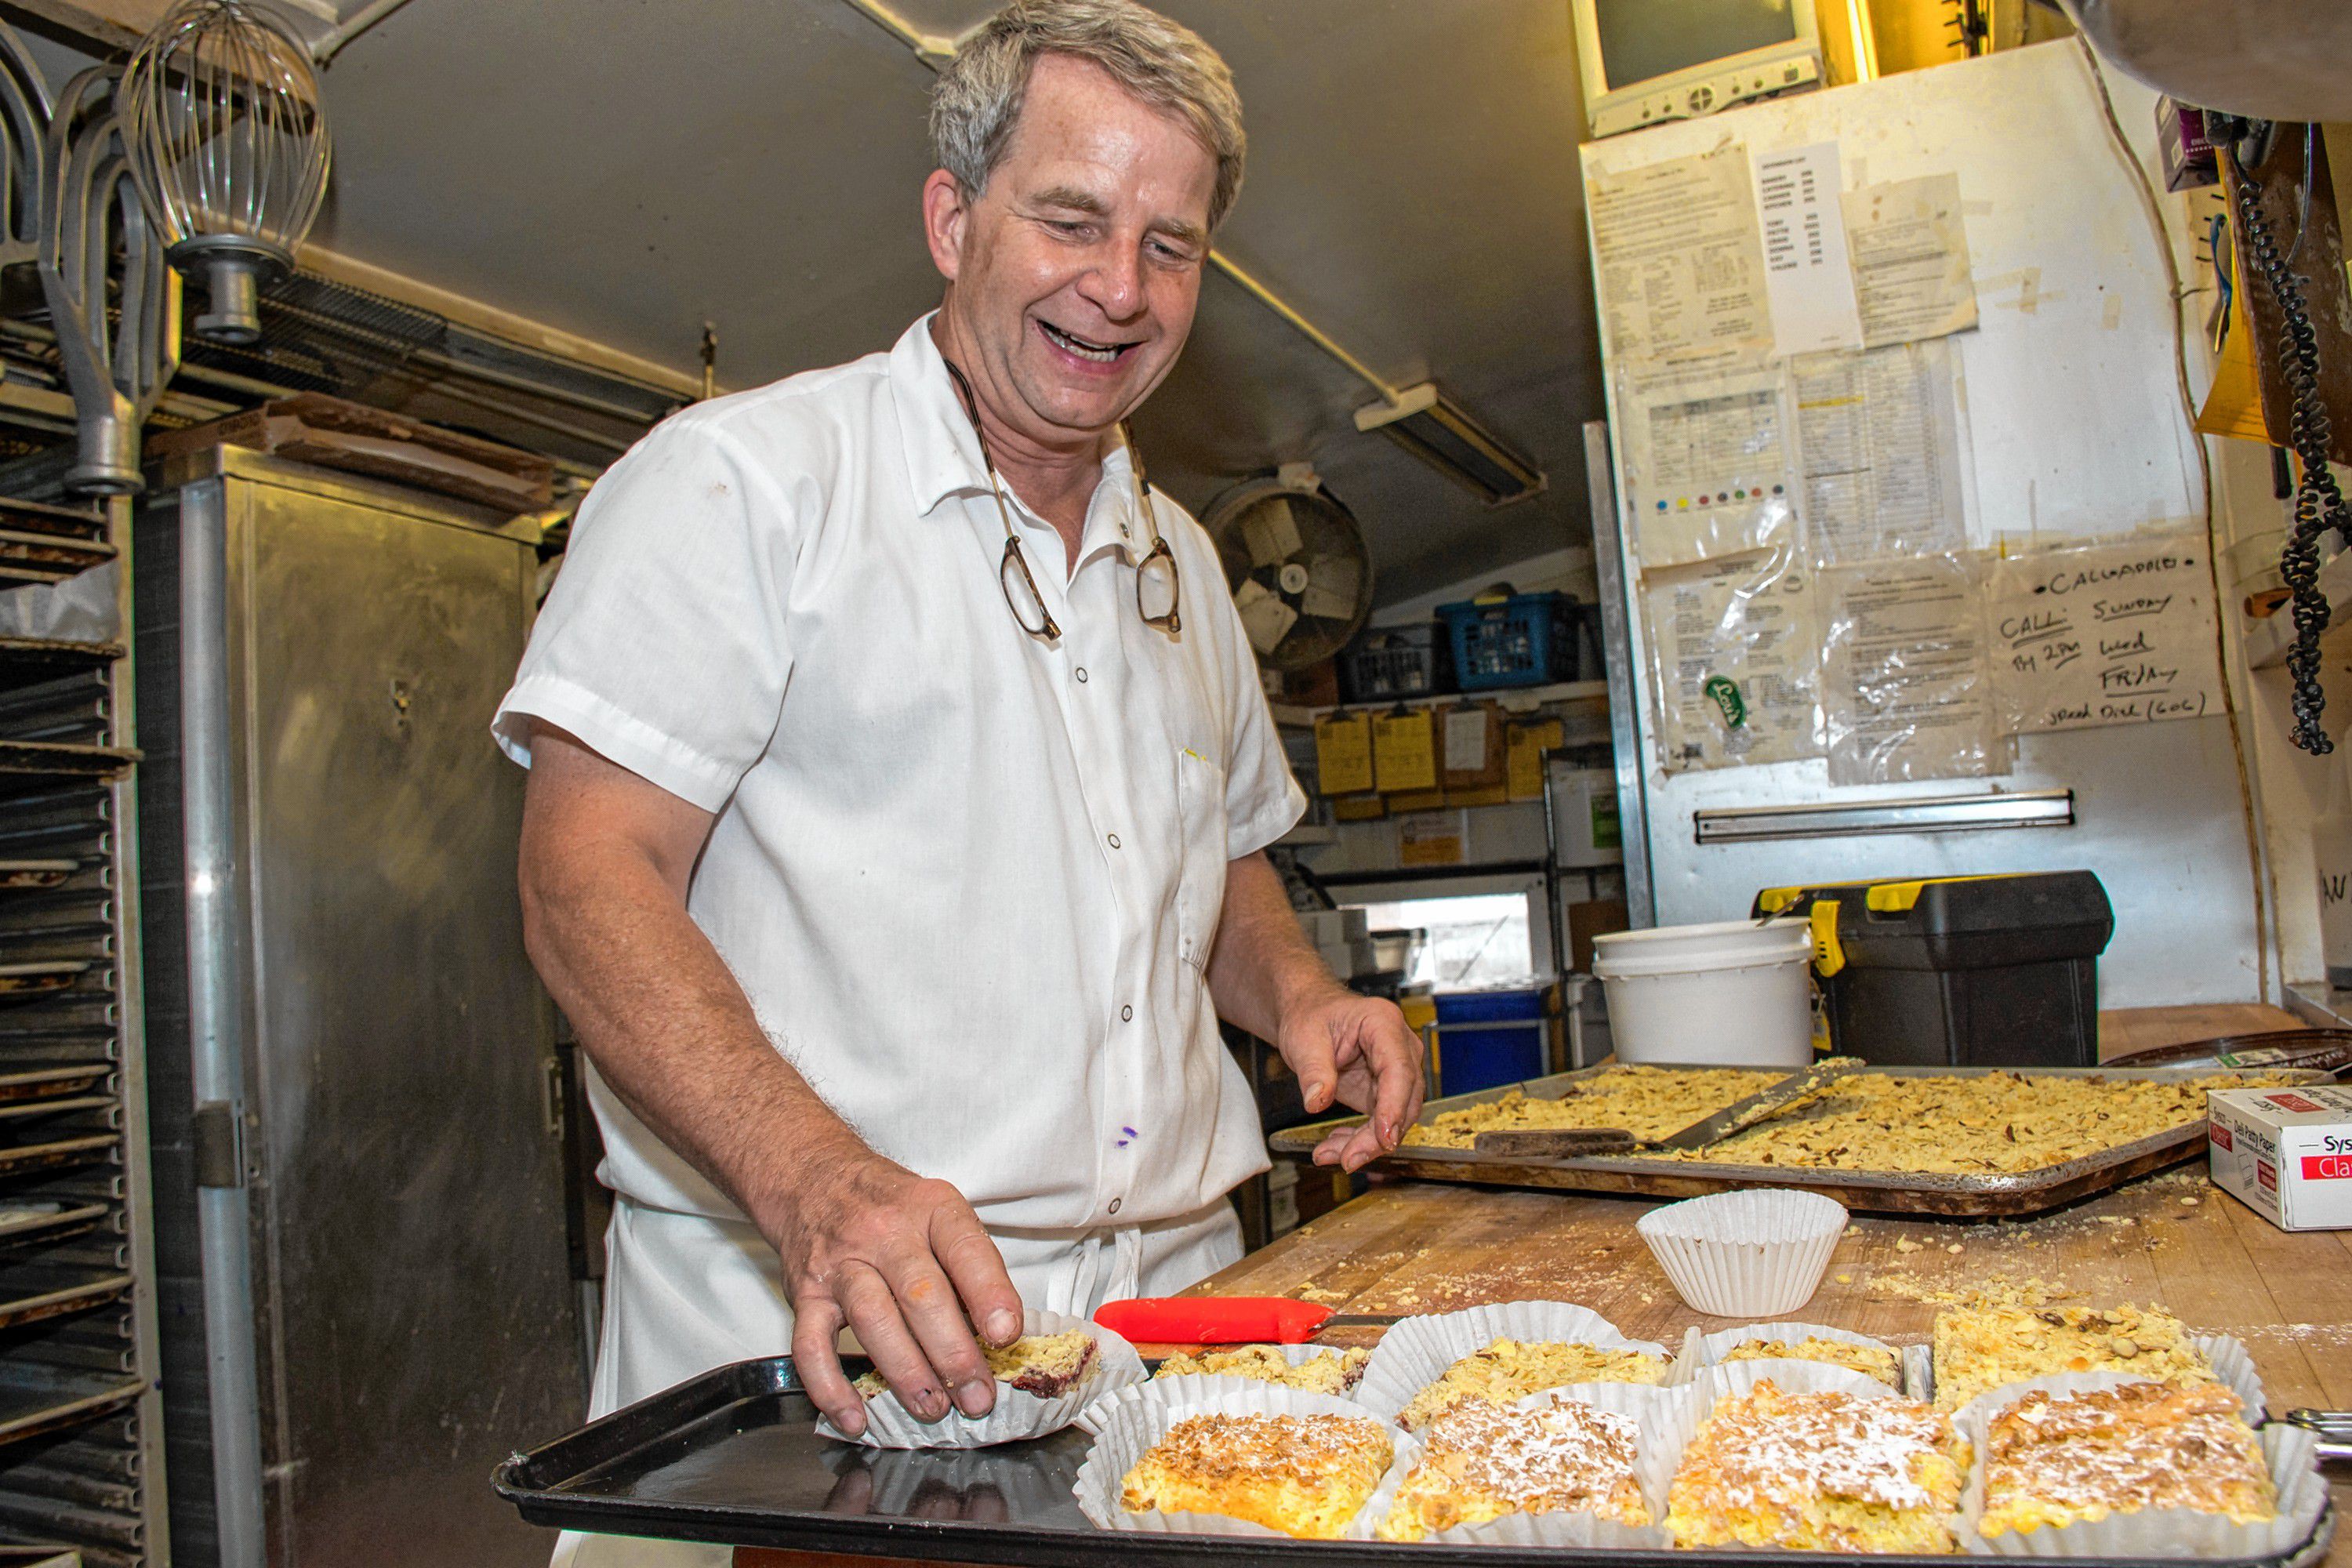 For 25 years, Toby Fried has baked in the back room "bakery." He knows what to make for tourists and what to make for Dartmouth College Students. Here he's cutting up raspberry almond squares to add to the tray of lemon squares. "The students don't go much for the lemon coconut squares but the tourists do." Nancy Nutile-McMenemy photograph.